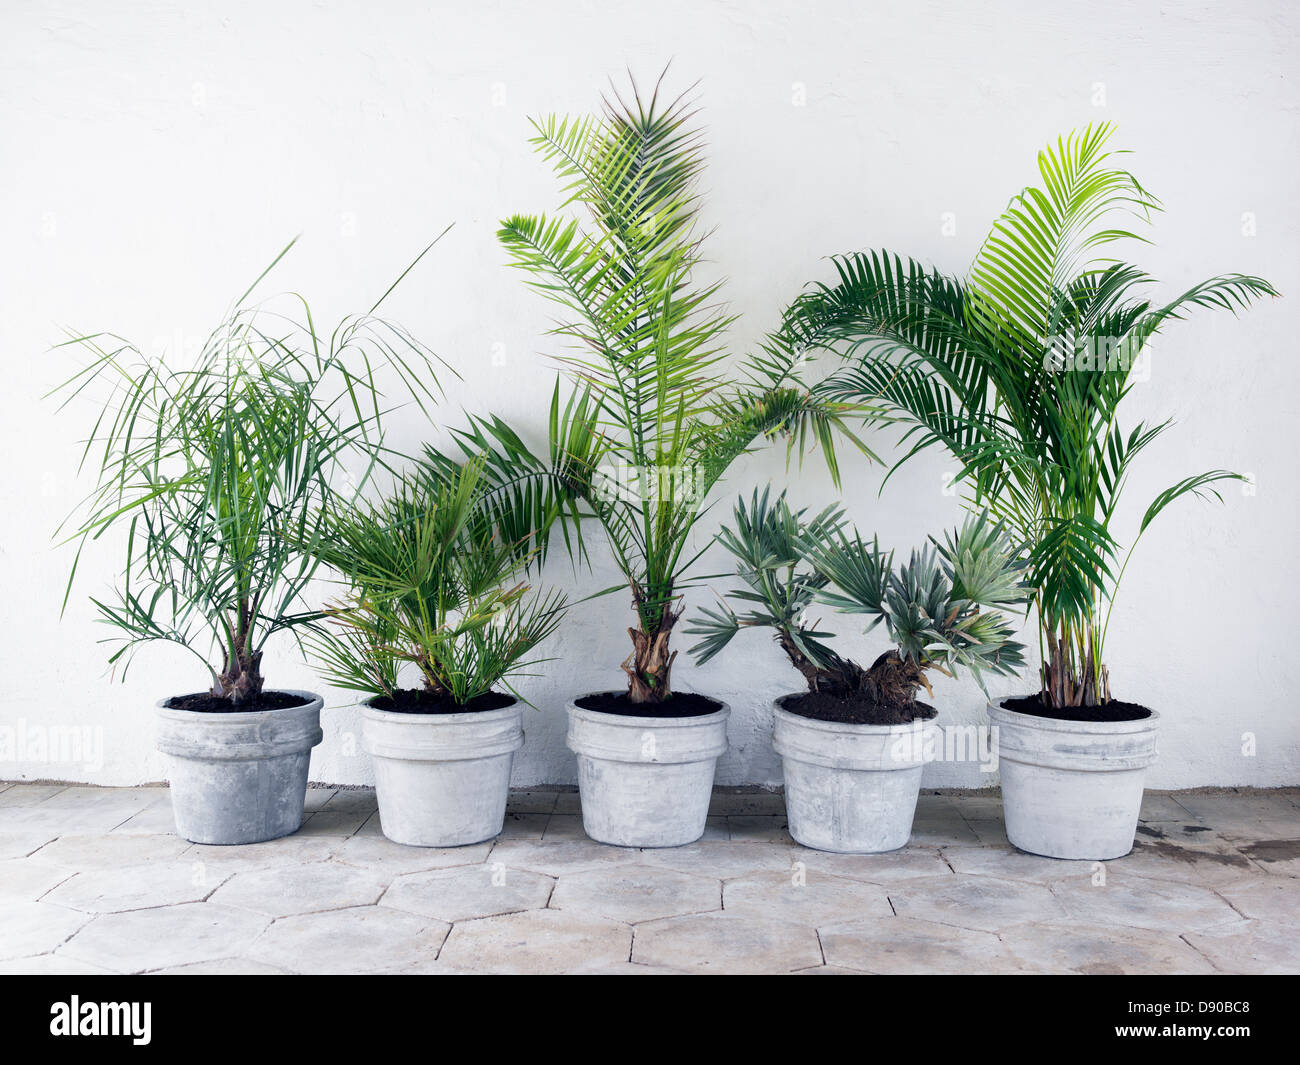 Palm-trees in pots against a wall, Sweden. Stock Photo